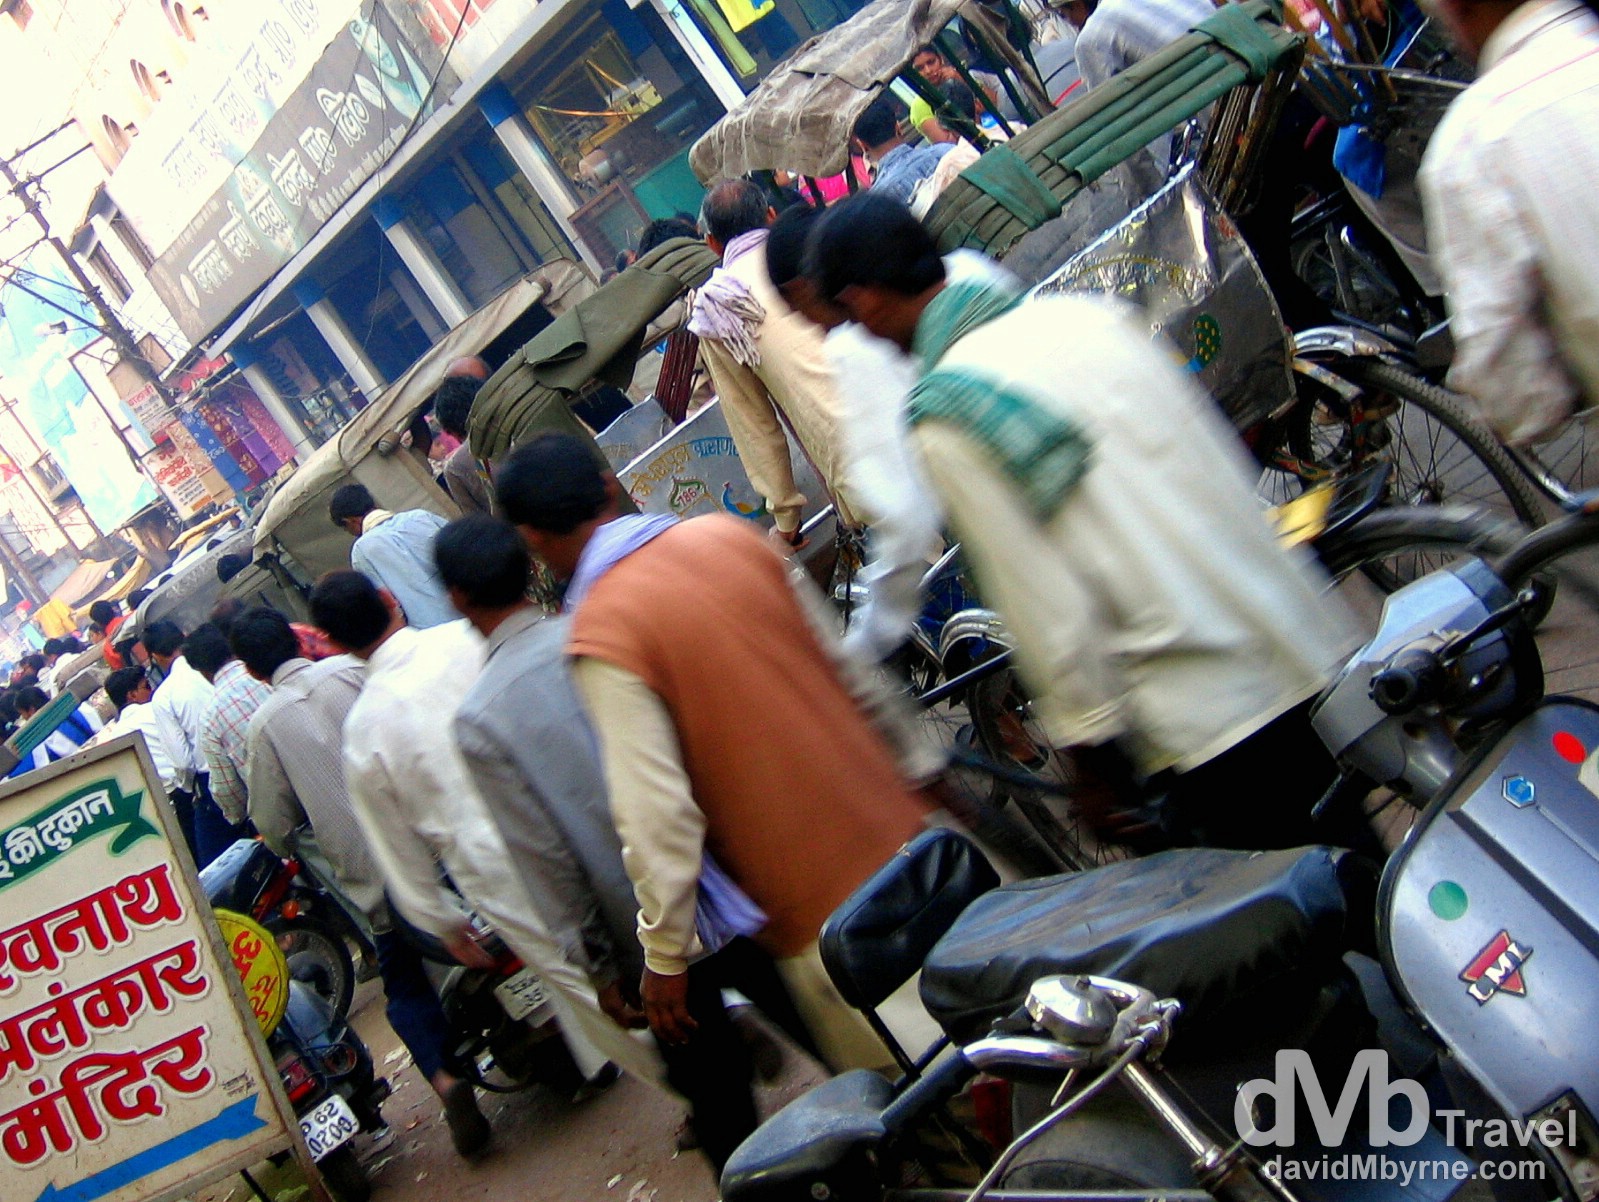 A typical mid-afternoon scene on Madanpura Road, Varanasi, India. March 18th 2008.